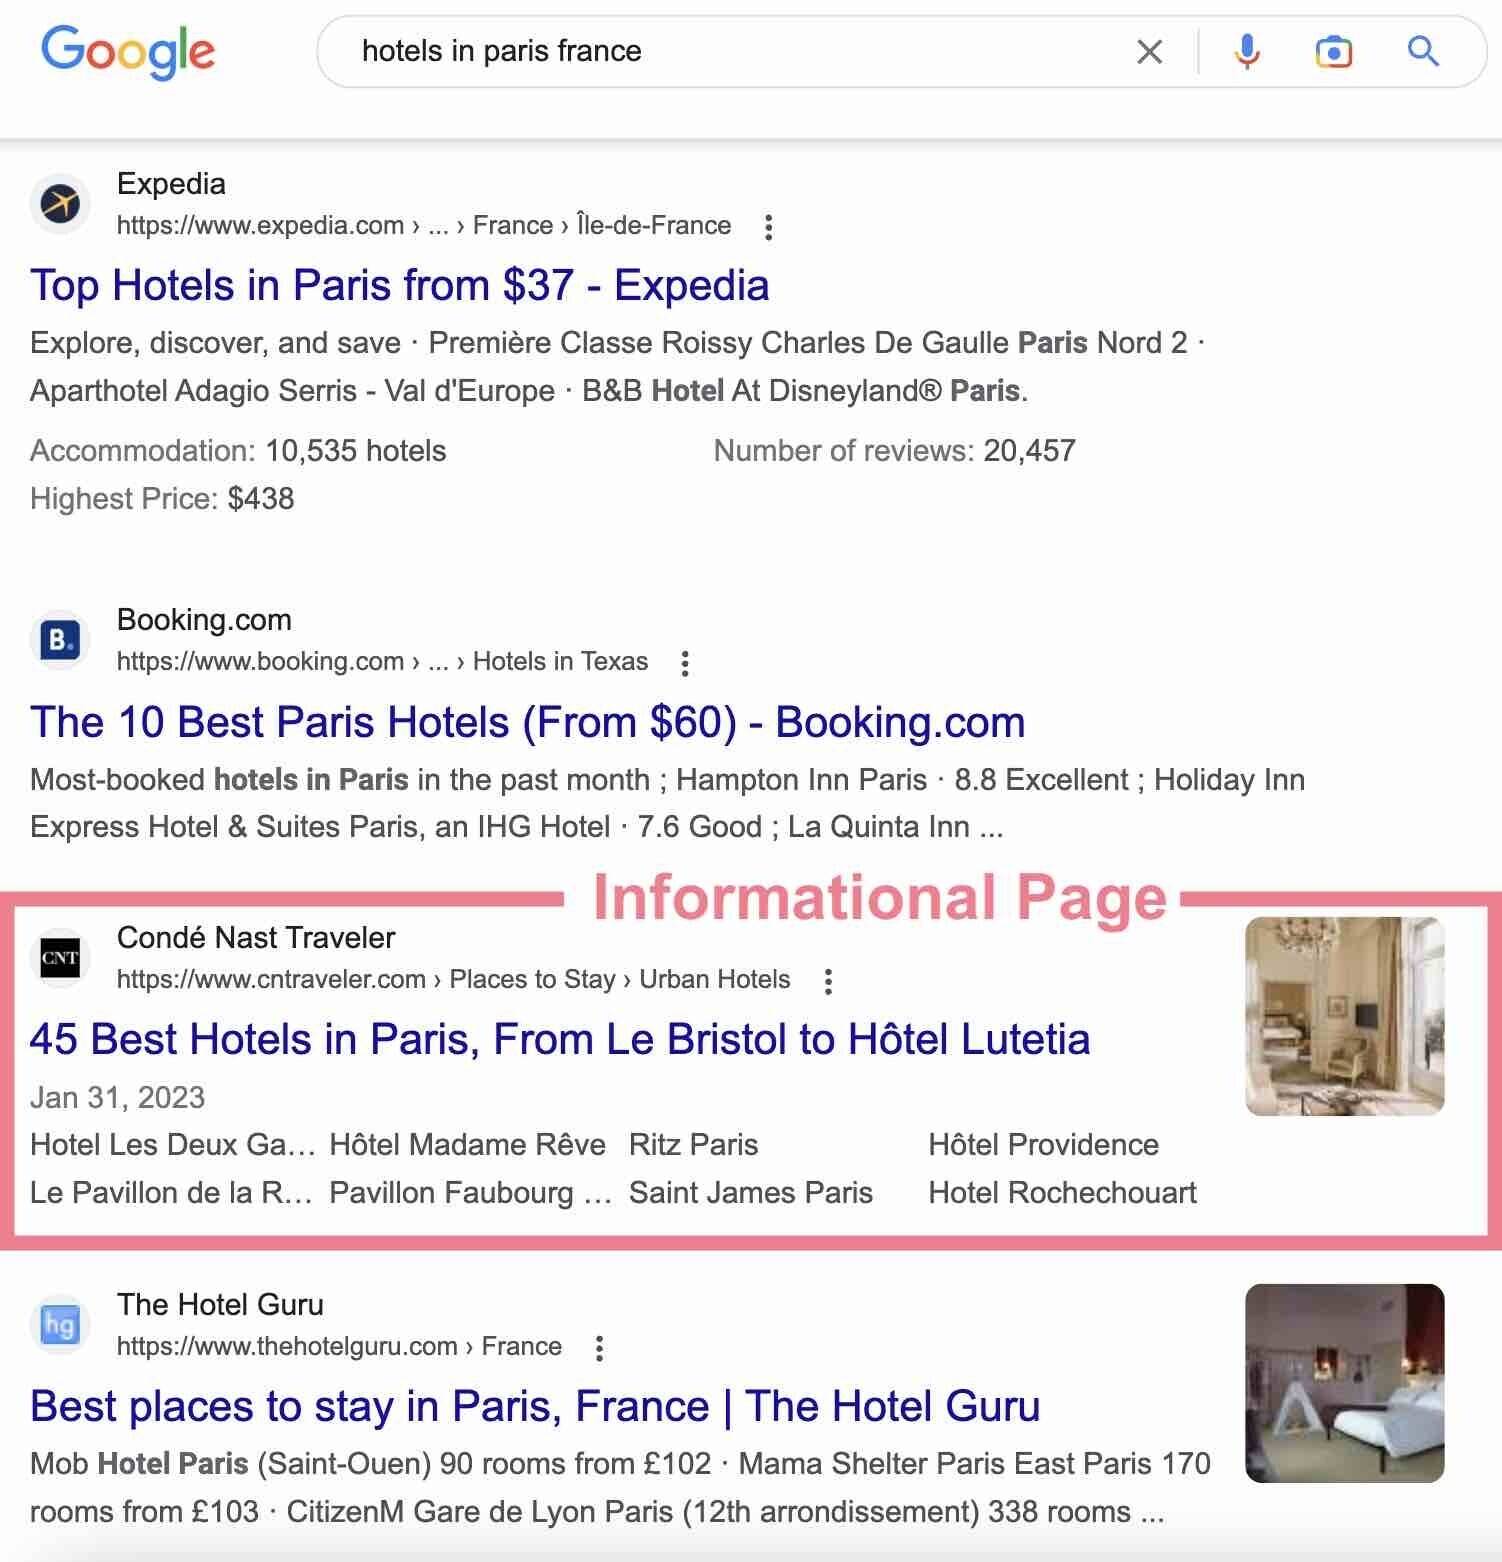 hotels in Paris france informational page google search